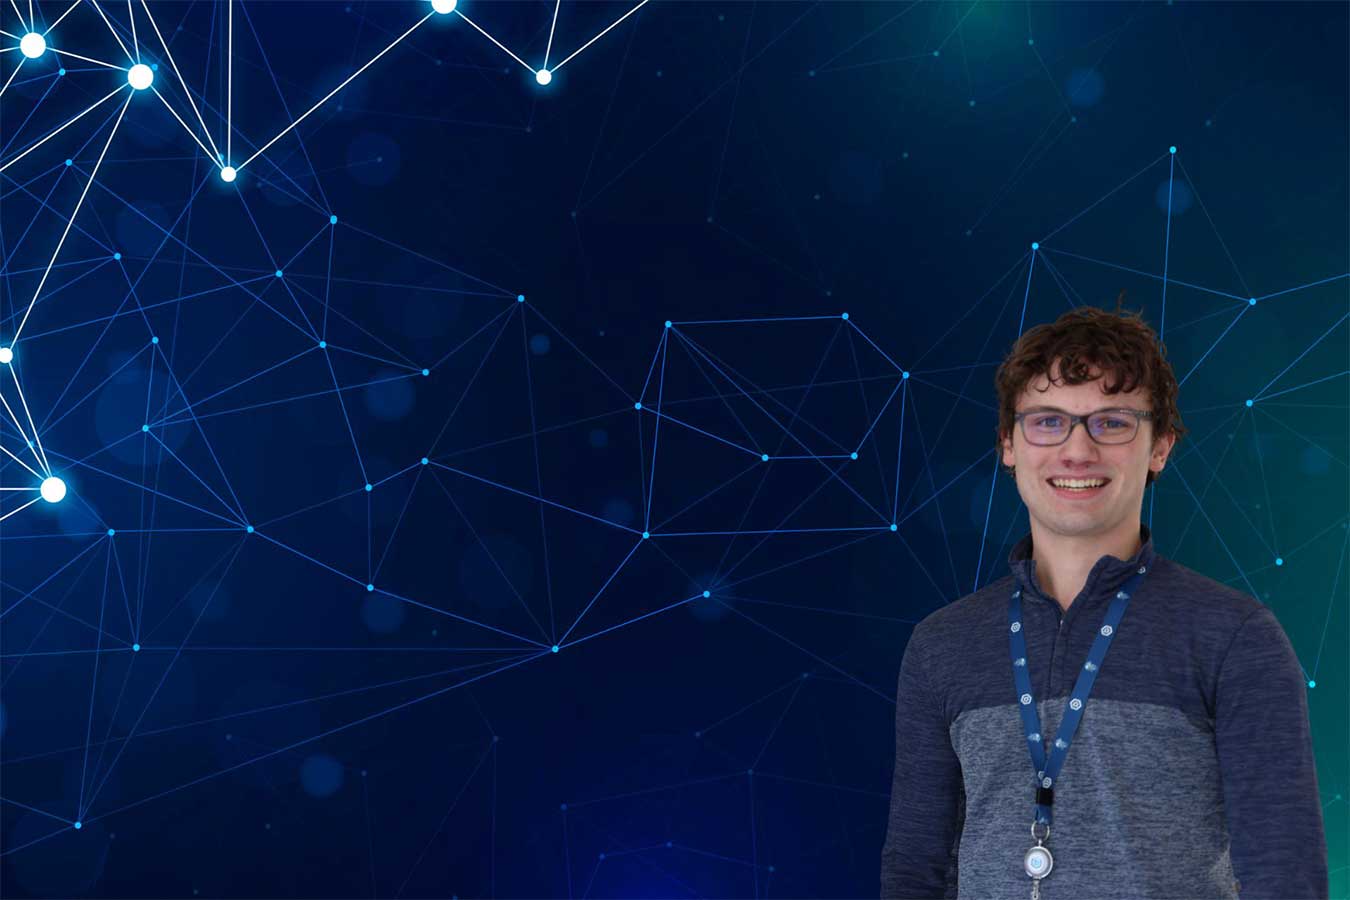 DSU student David Siemienas pictured with a blue background that has dots connected with lines.